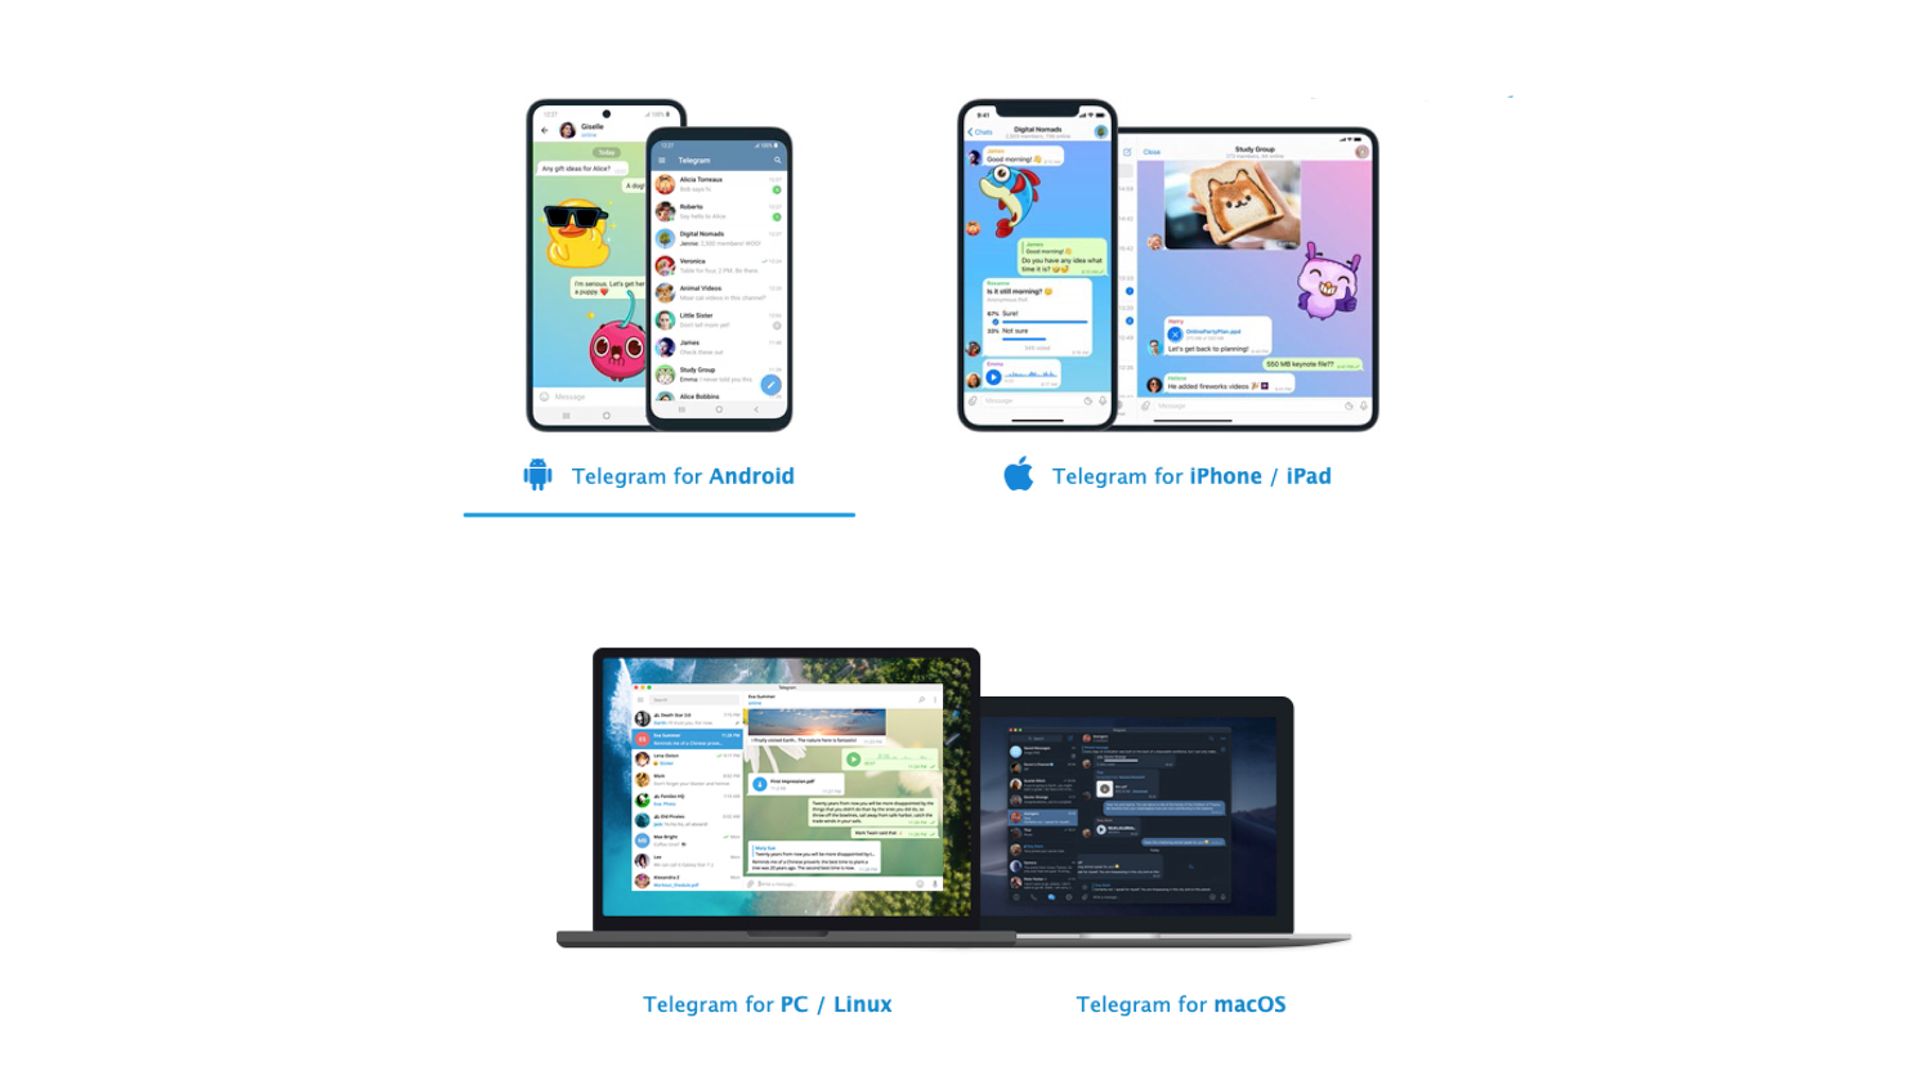 Telegram app options for iOS, Android, macOS, Windows, and Linux.